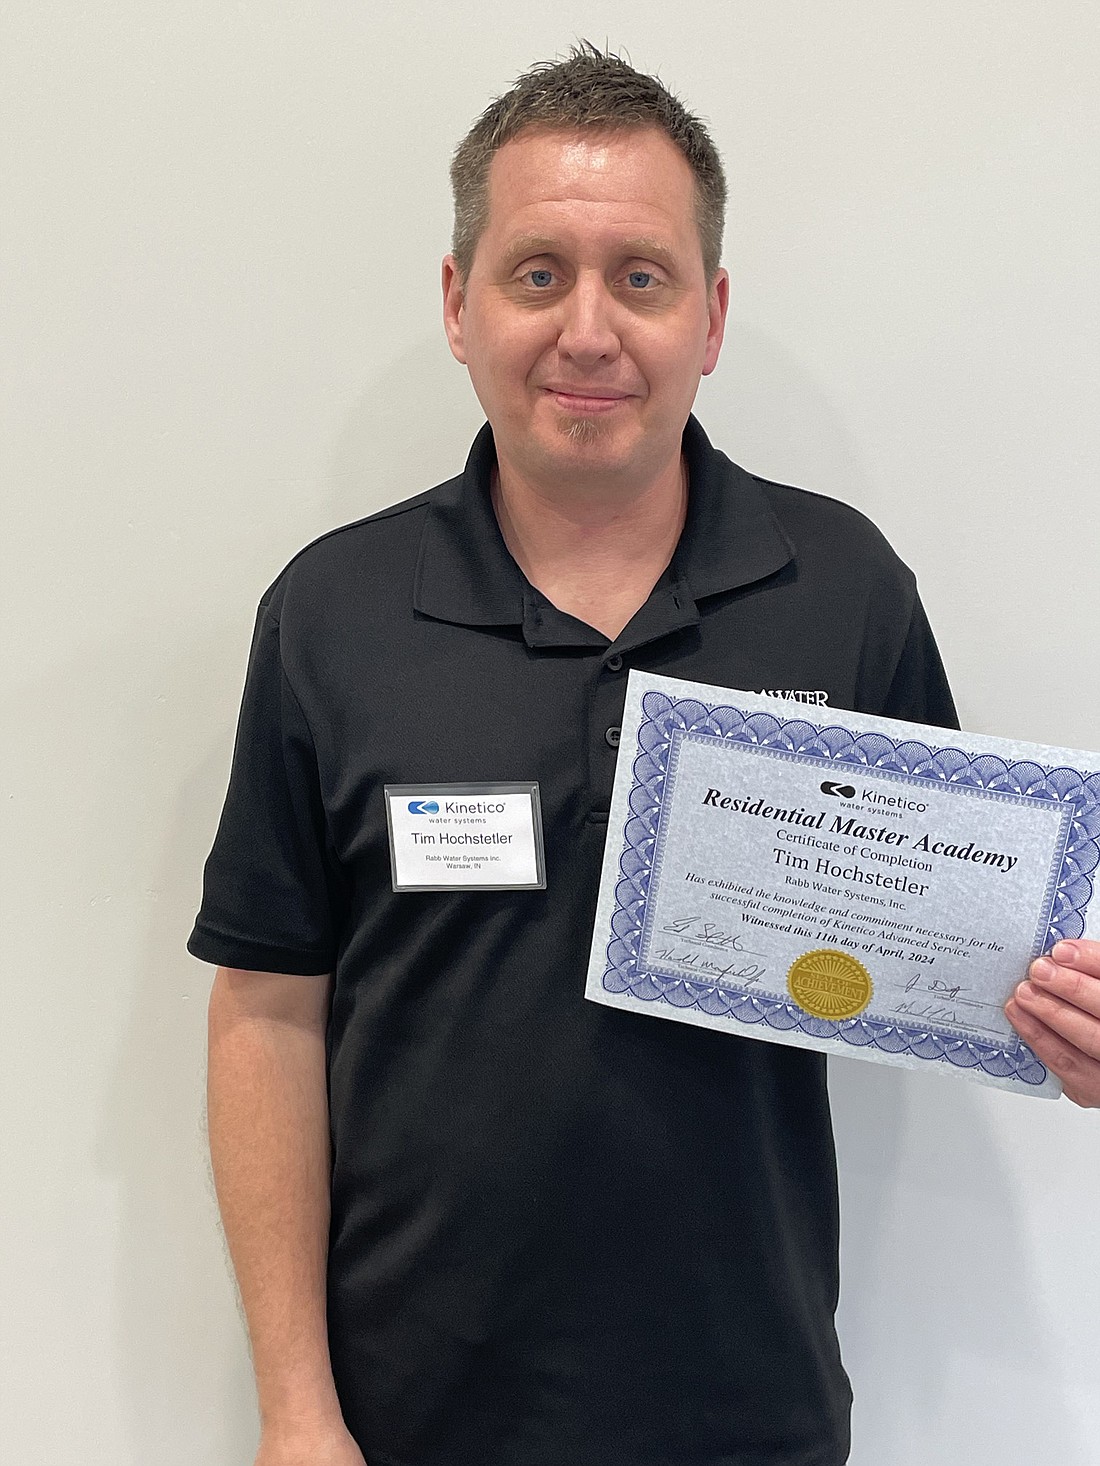 Tim Hoschstetler is pictured with his completion certificate.